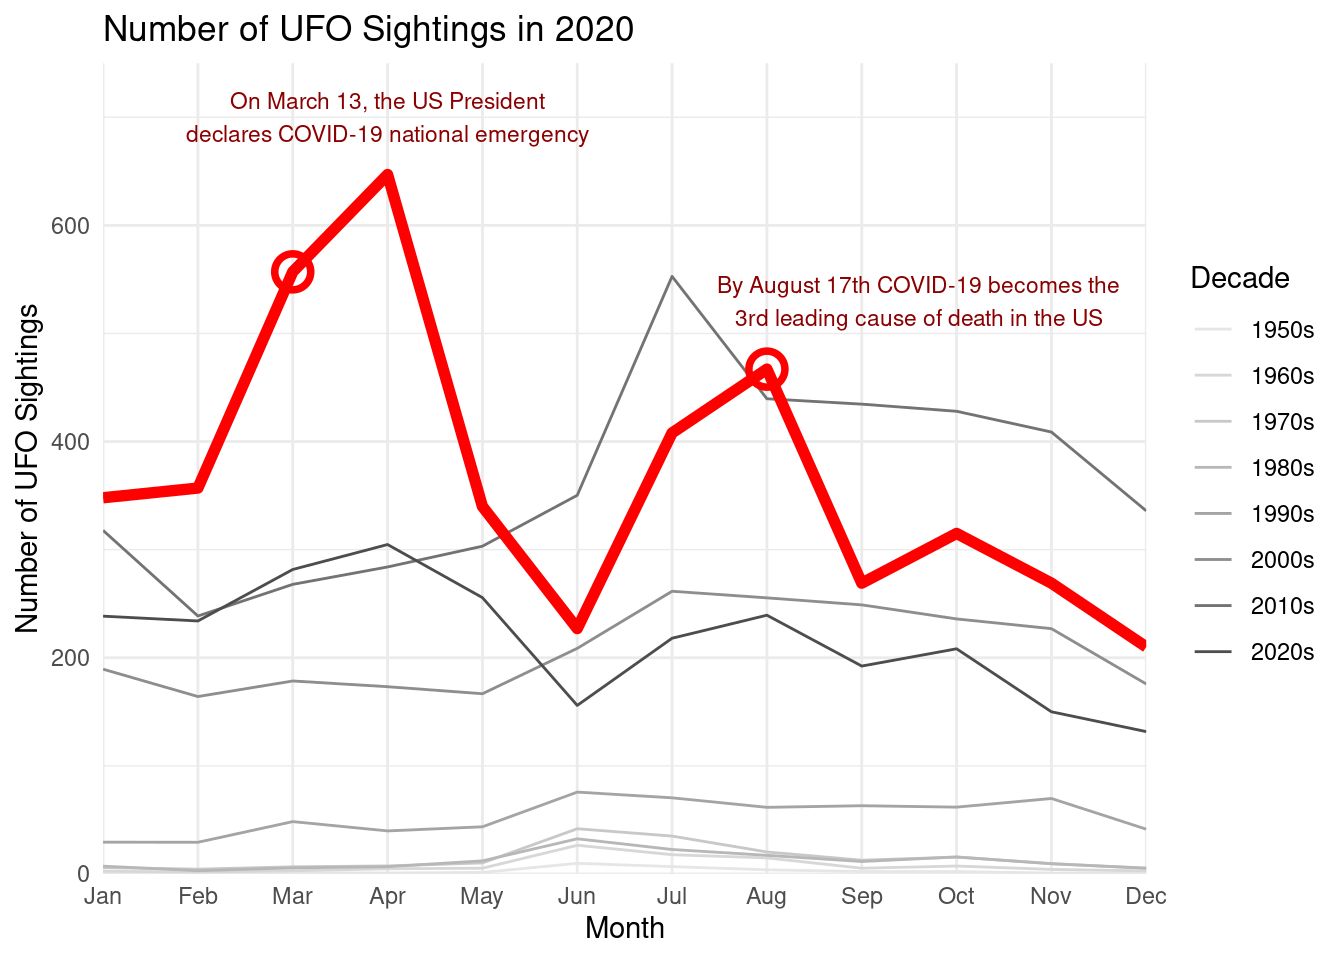 This is a line plot showing the number of UFO sightings per decade from the 1950s to the 2020s. Months are on the x-axis while the number of sightings is on the y-axis. Decades prior to the 21st century have less sightings with monthly values less than 100 sightings. In the 2000s and the 2020s, sightings tend to hover around 200 a month. The decade with the most UFO sightings was the 2010s which at its peak in July reached approximately 550 sightings. For all decades except the 2020s, there is a slight peak in sightings in summer months like June and July. However, the peak in the 2020s was in the spring around March and April. There is also a bolded line representing just the year 2020 which is when the COVID-19 pandemic started. Plot annotations on two peaks in UFO sightings denote that on March 13 the US President declared COVID-19 a national emergency and by August 17 COVID-19 became the third leading cause of death in the US.